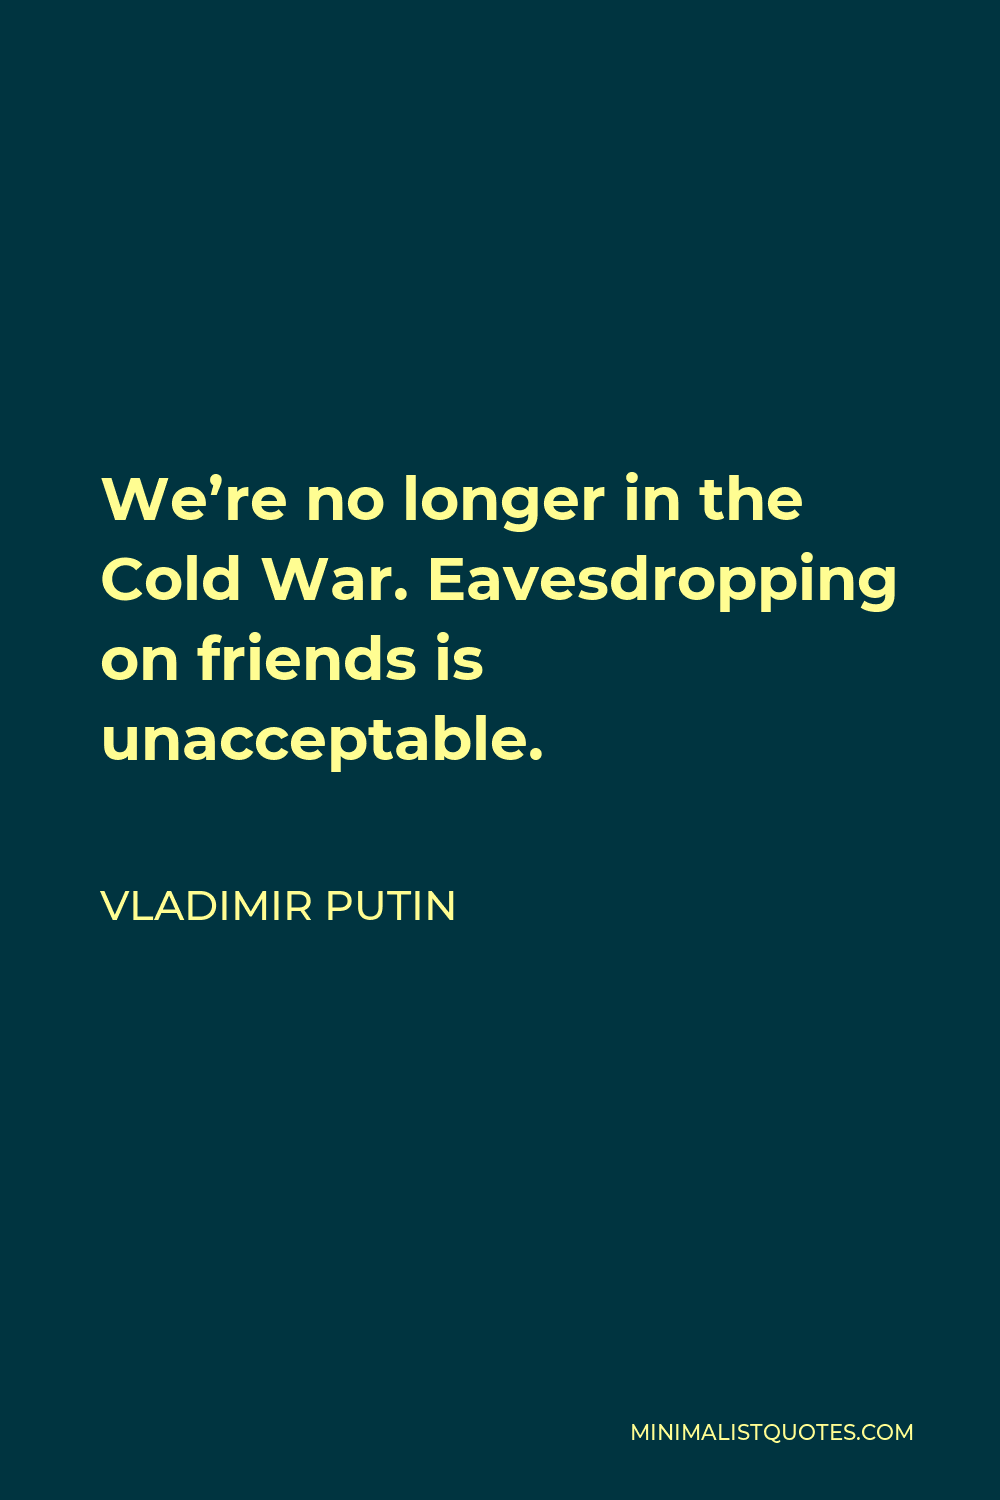 Vladimir Putin Quote - We’re no longer in the Cold War. Eavesdropping on friends is unacceptable.